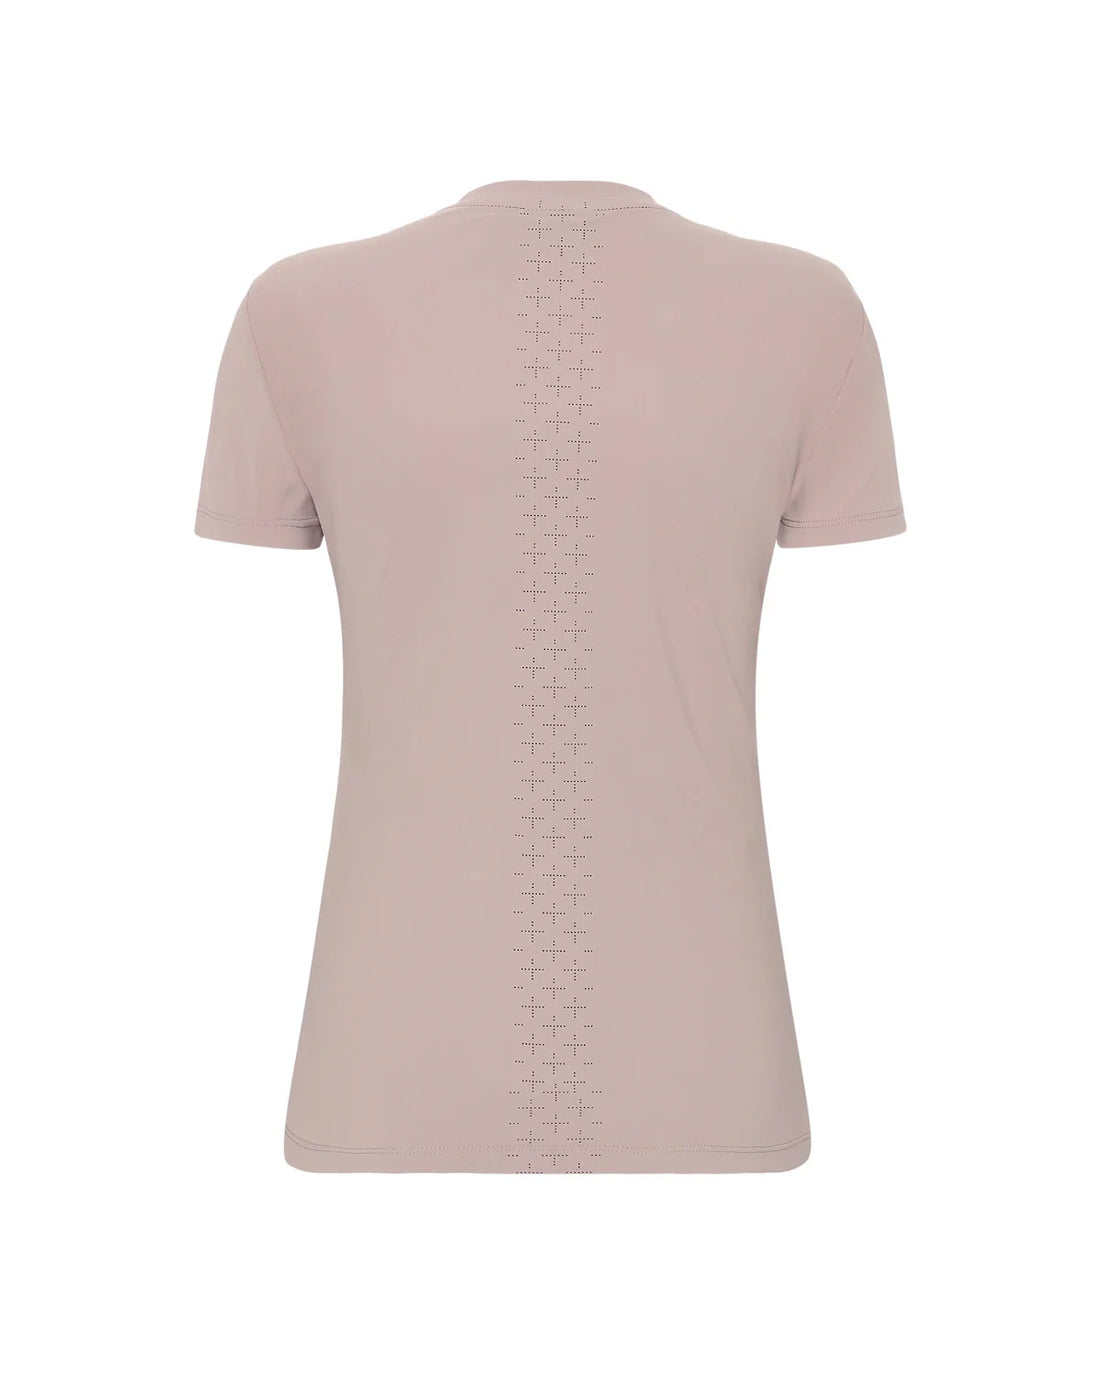 Trolle Athl Perforated T-shirt  in Faded Rose